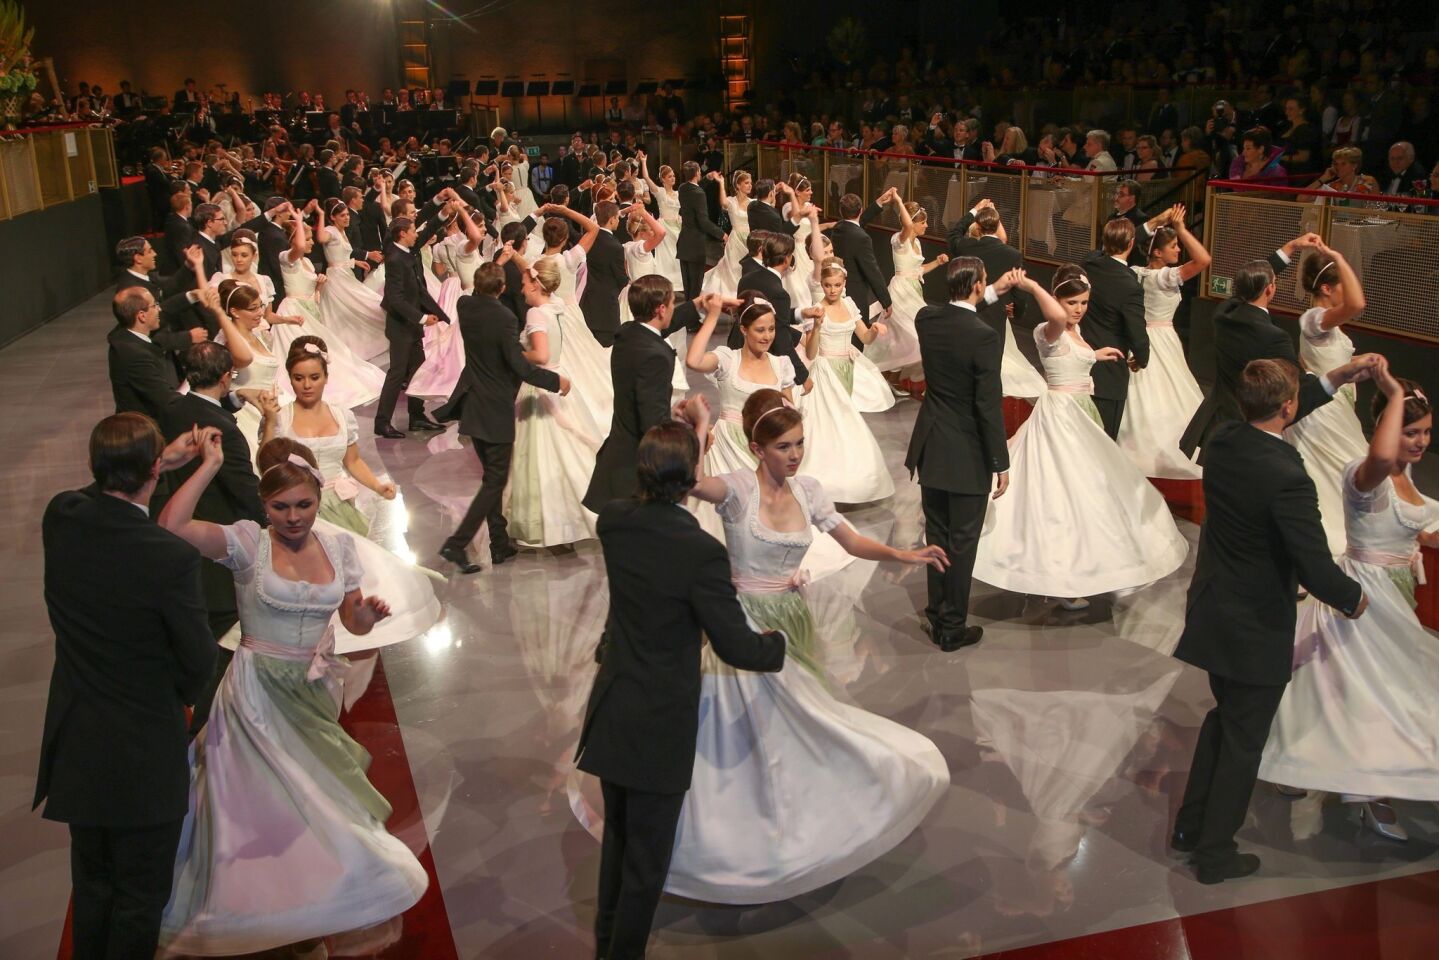 Young couples dance at the Salzburg Festival Ball held at the end of the 2014 Salzburg Festival.